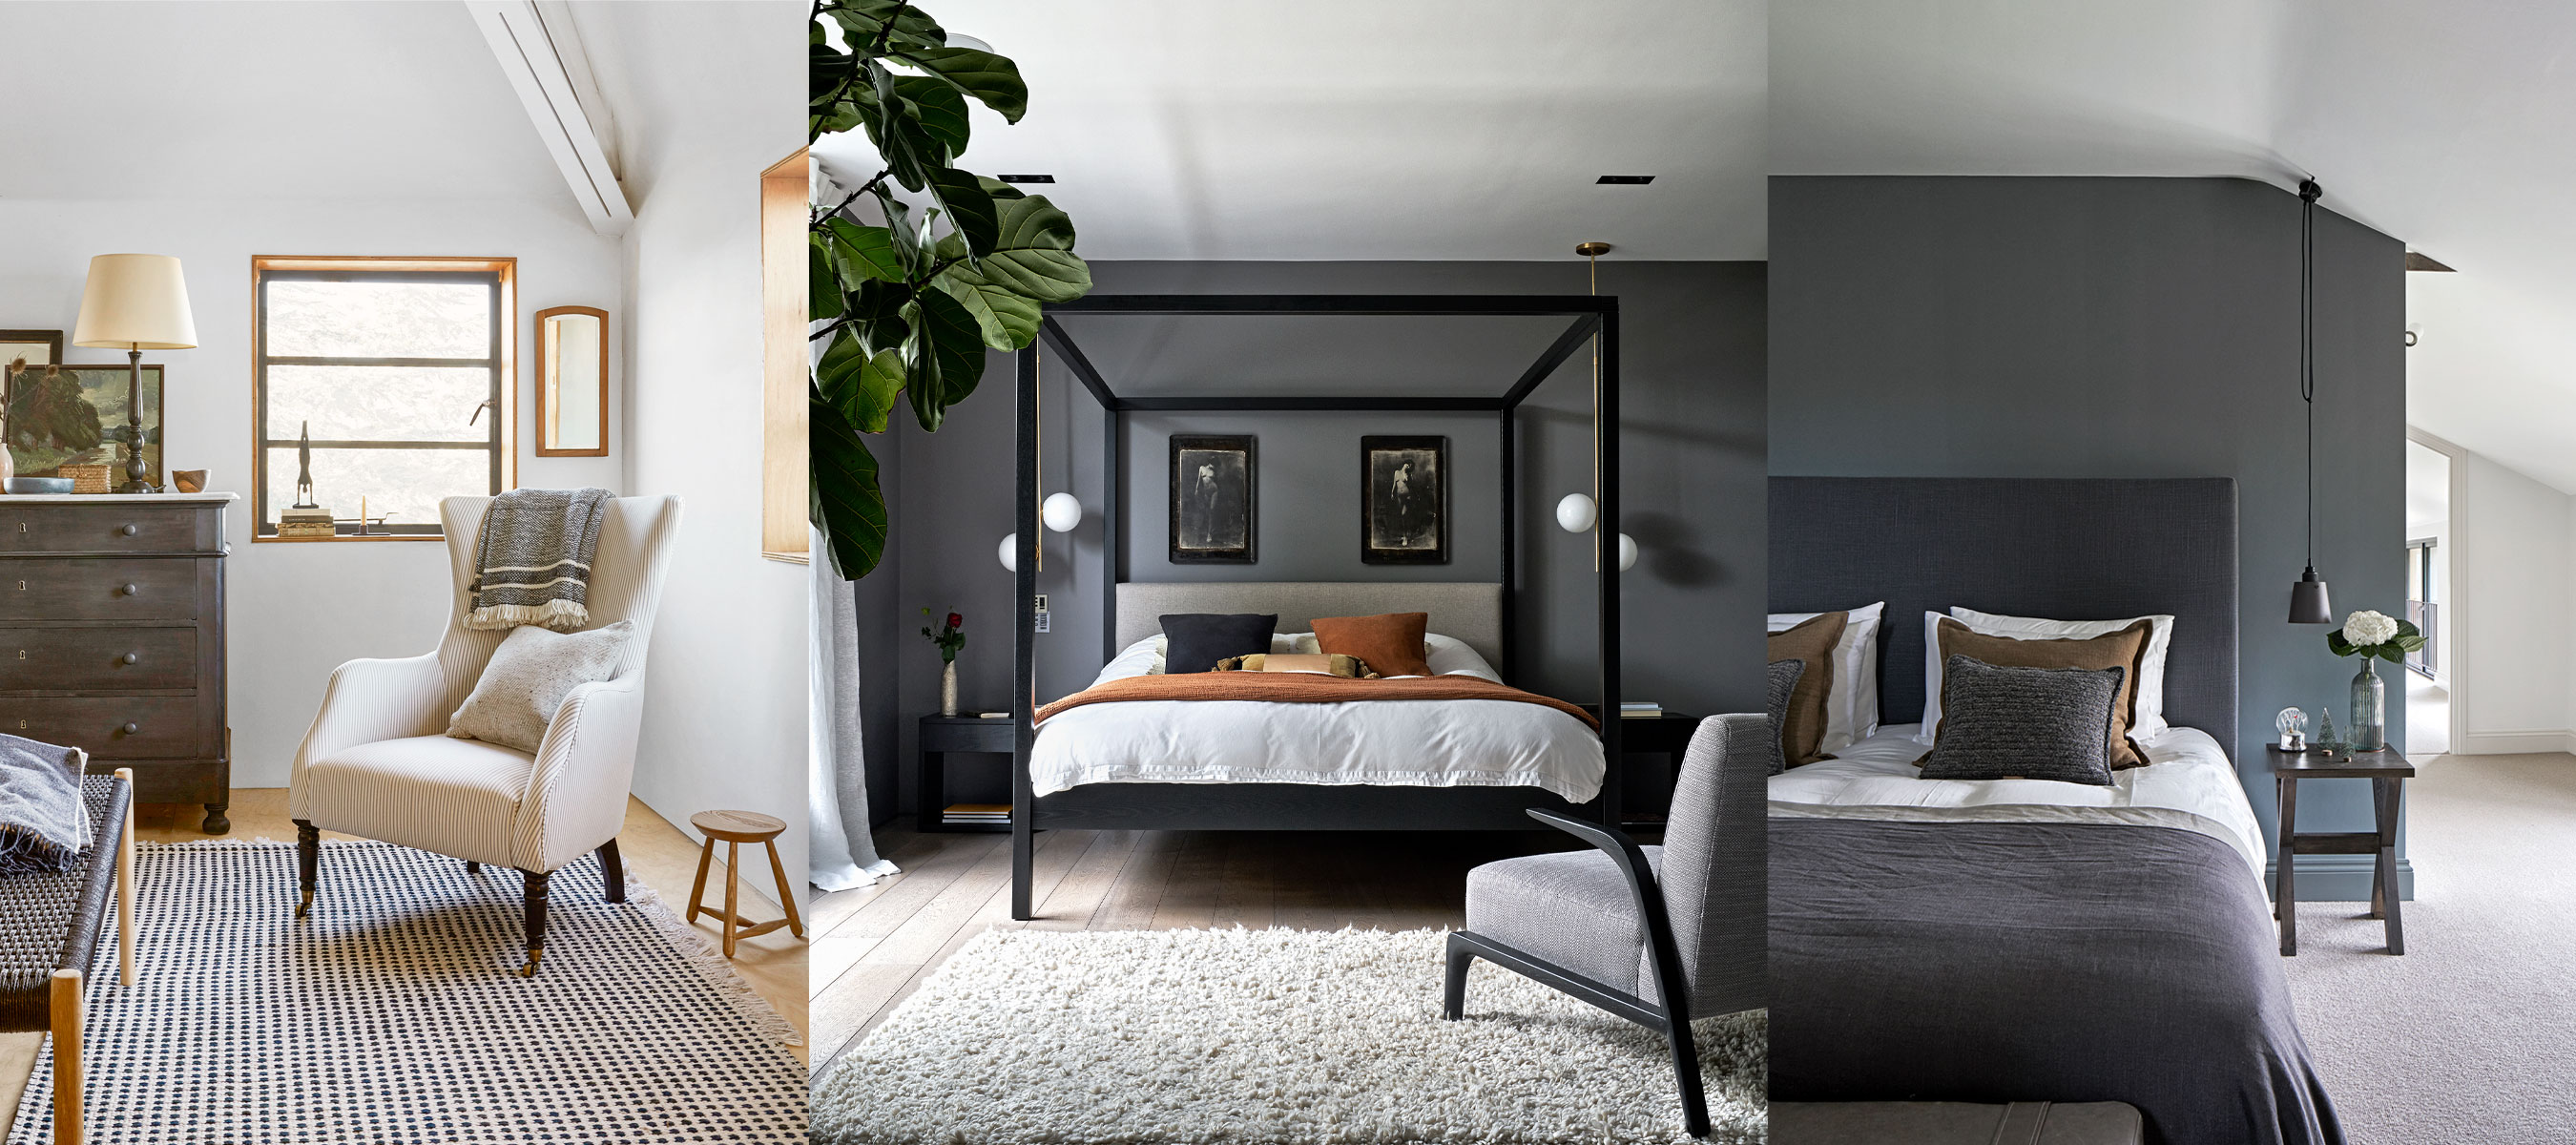 Grey and white bedroom ideas: 5 neutral color schemes to inspire